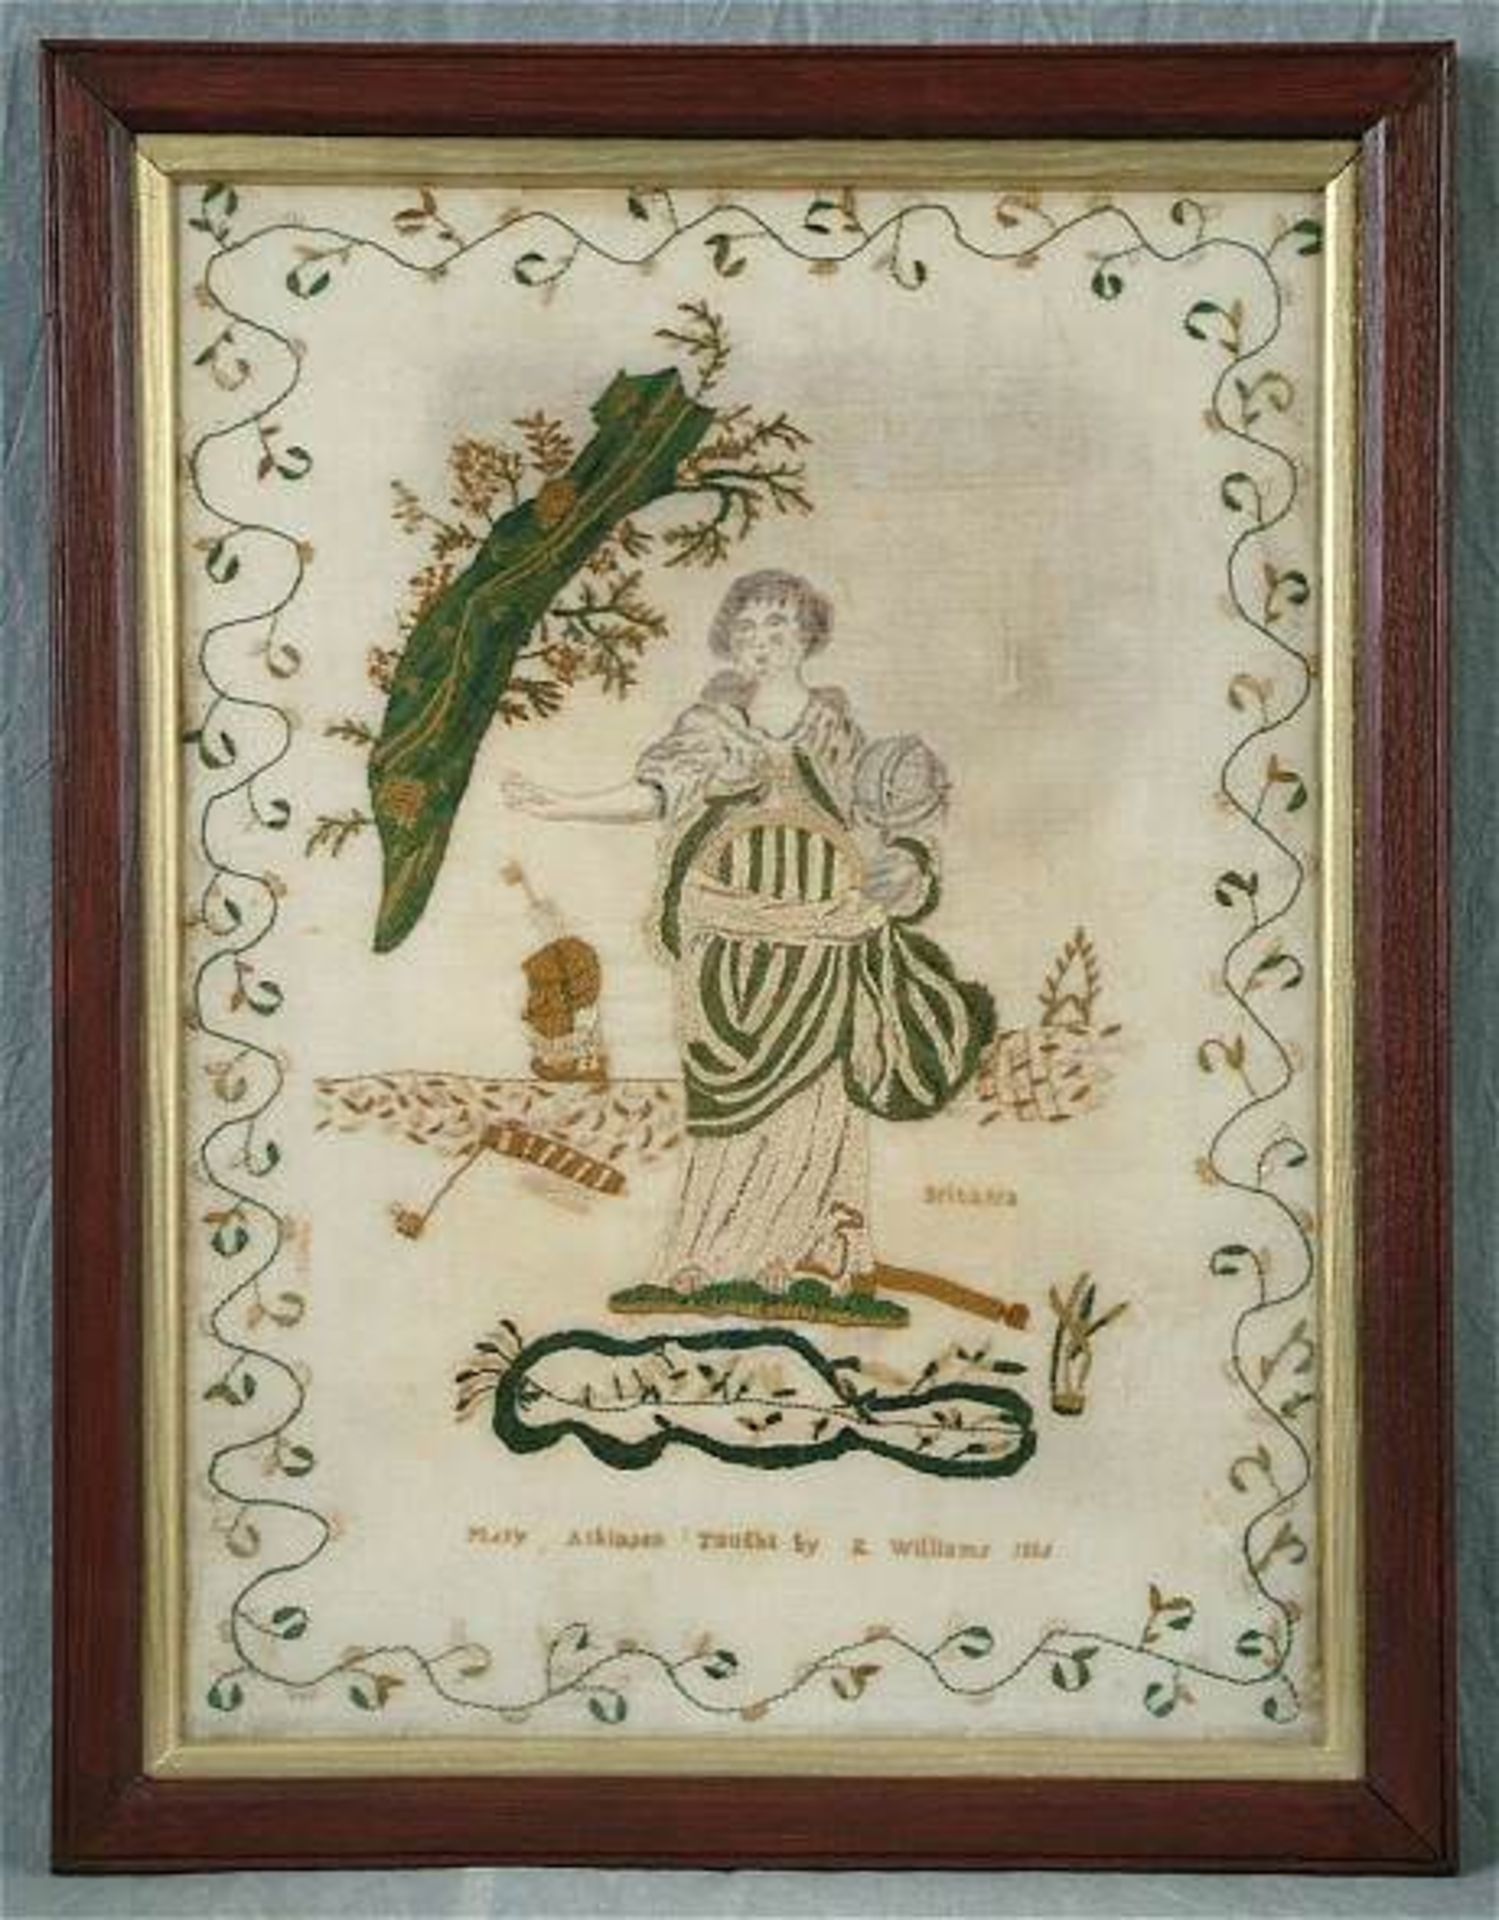 Needlework Sampler dated 1816 by Mary Atkinson FREE UK DELIVERY